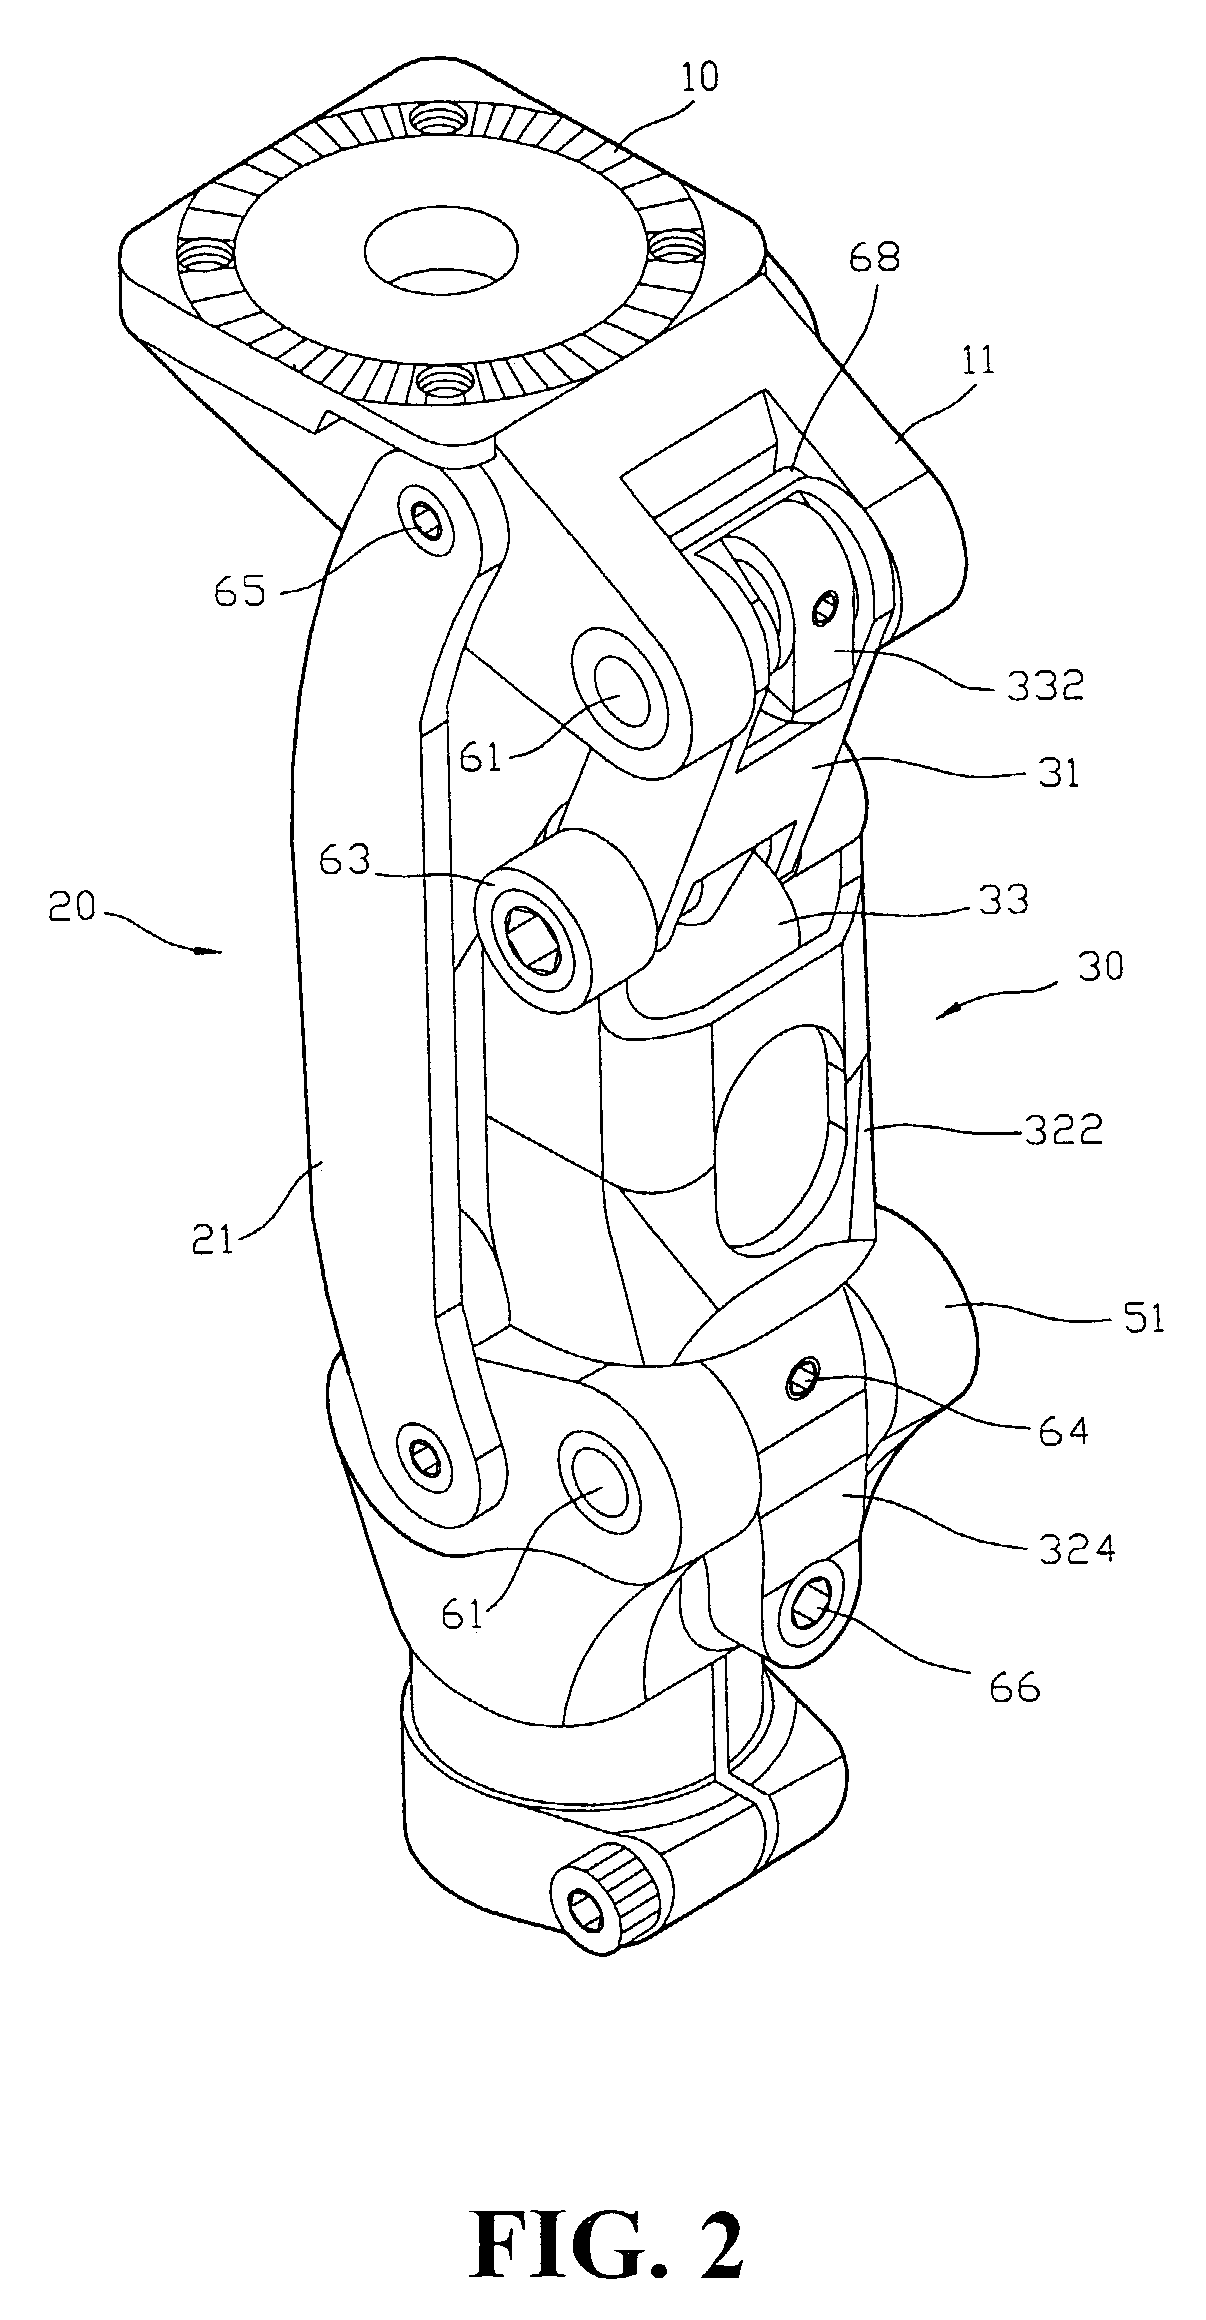 Positioning and buffering device for artificial knee joint